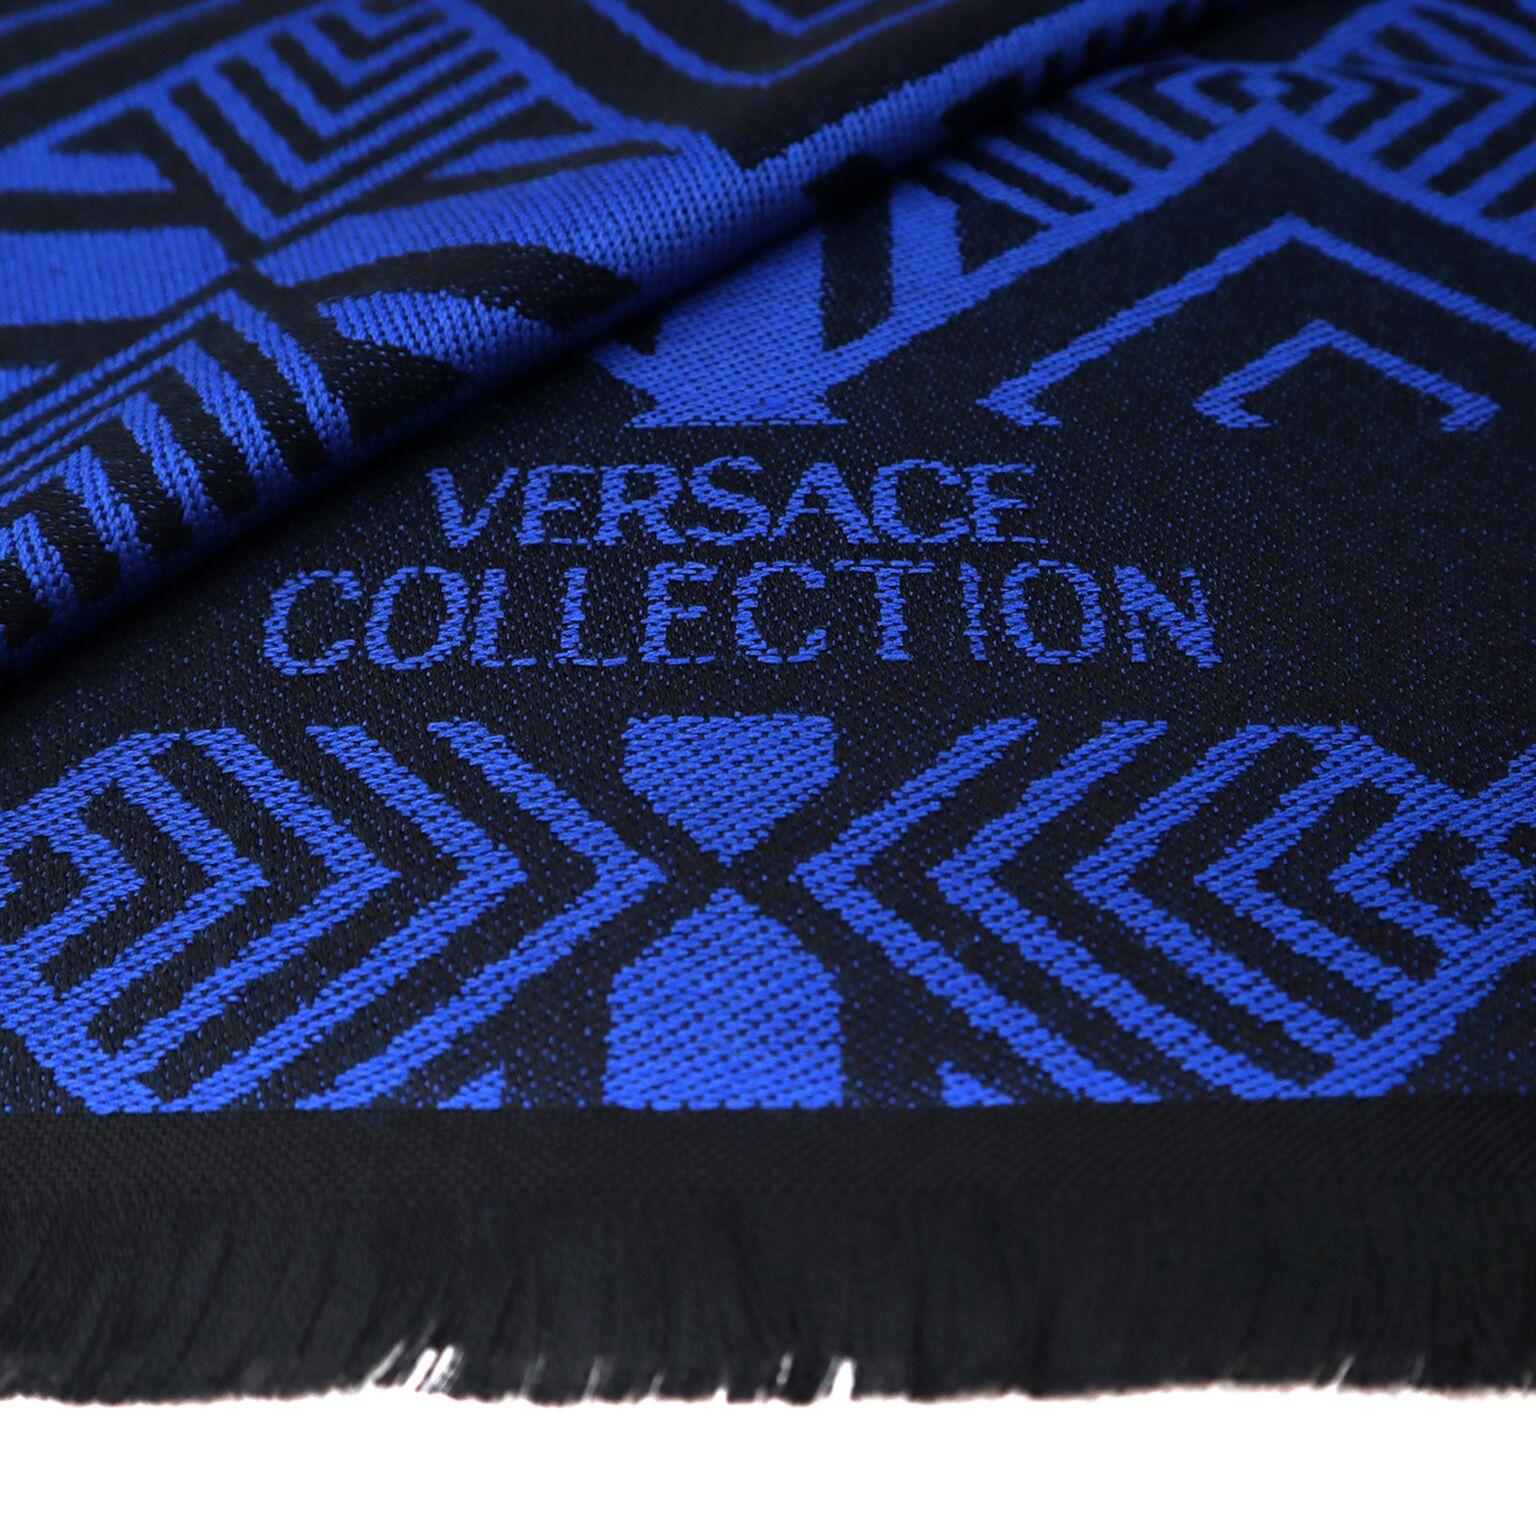 This is a beautiful Versace black & blue men's scarf made of 75% Wool 25% Acrylic with Versace Collection logo.
Length -73 Inches and Width -16.5 Inches
Made in Italy.
